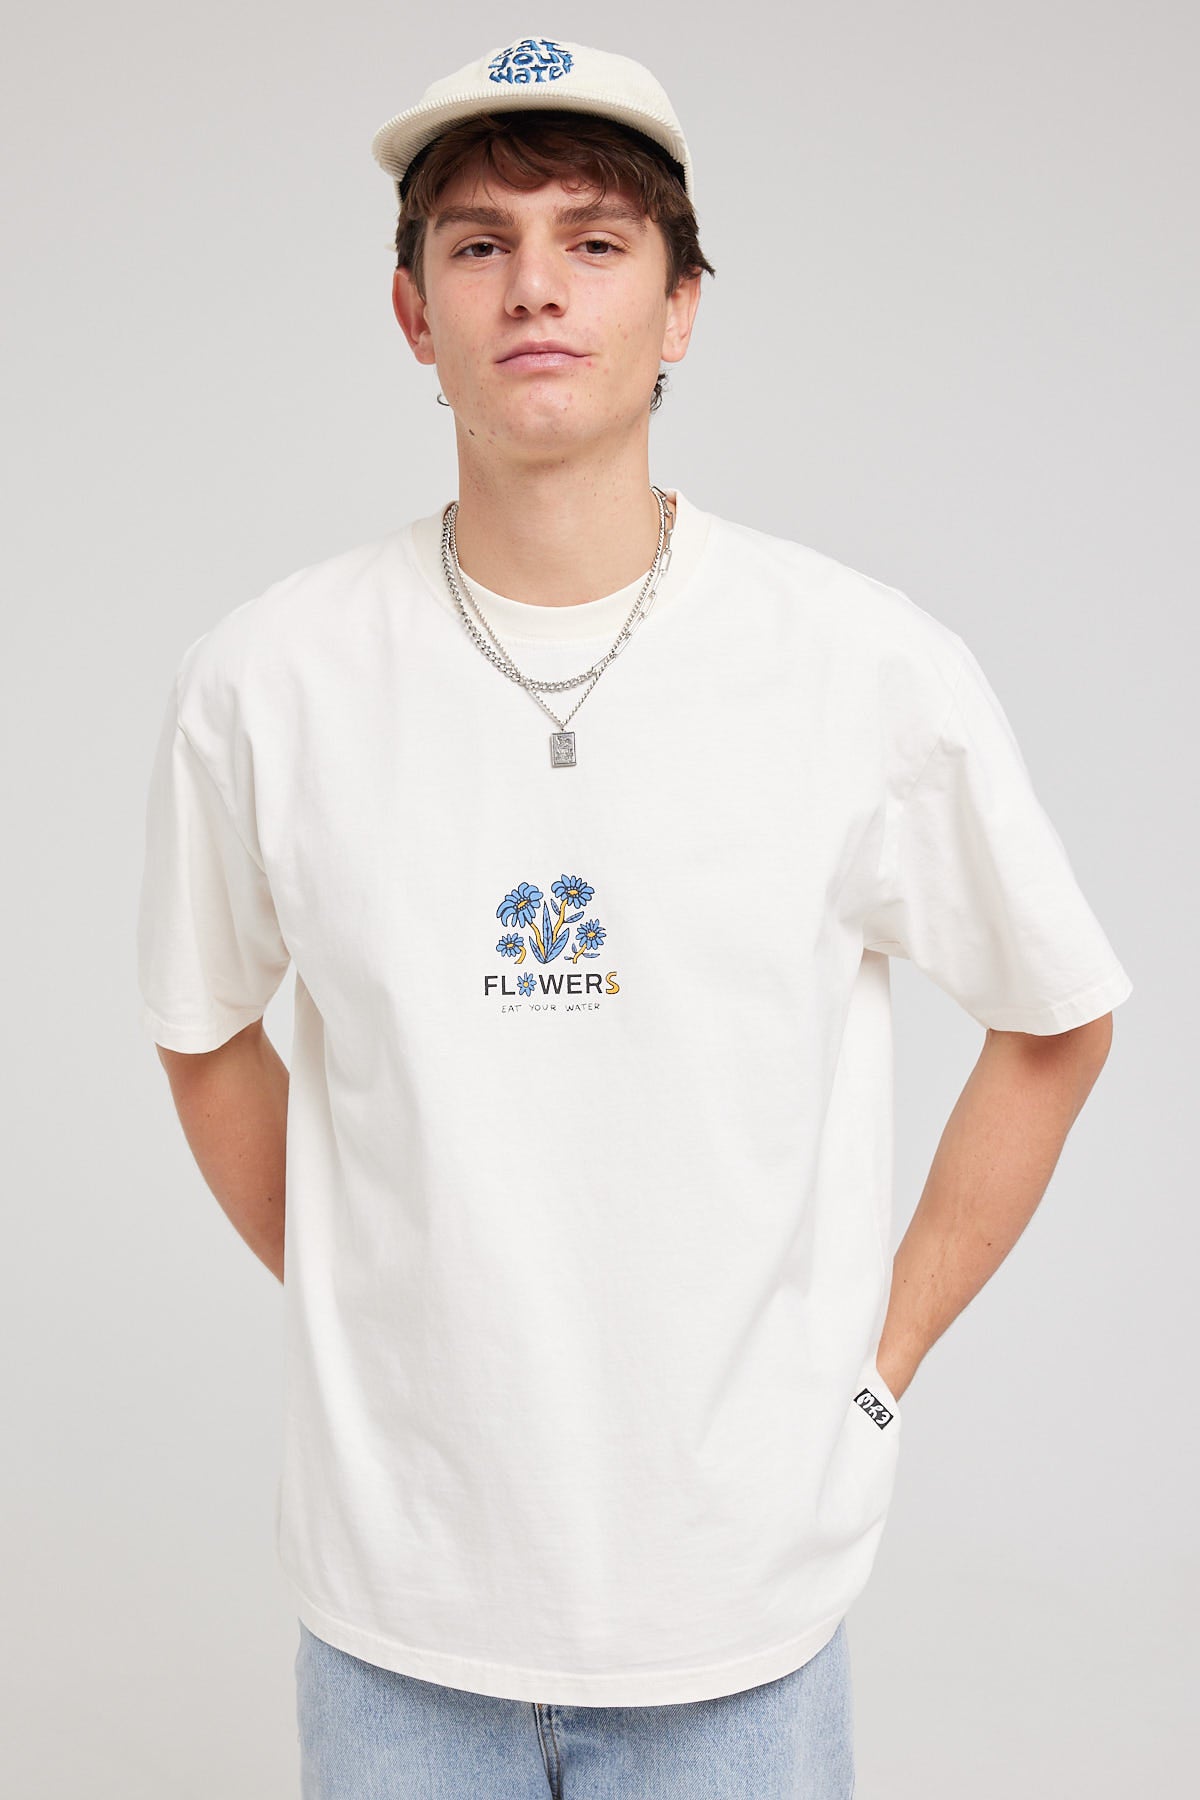 Eat Your Water Flowers Tee White